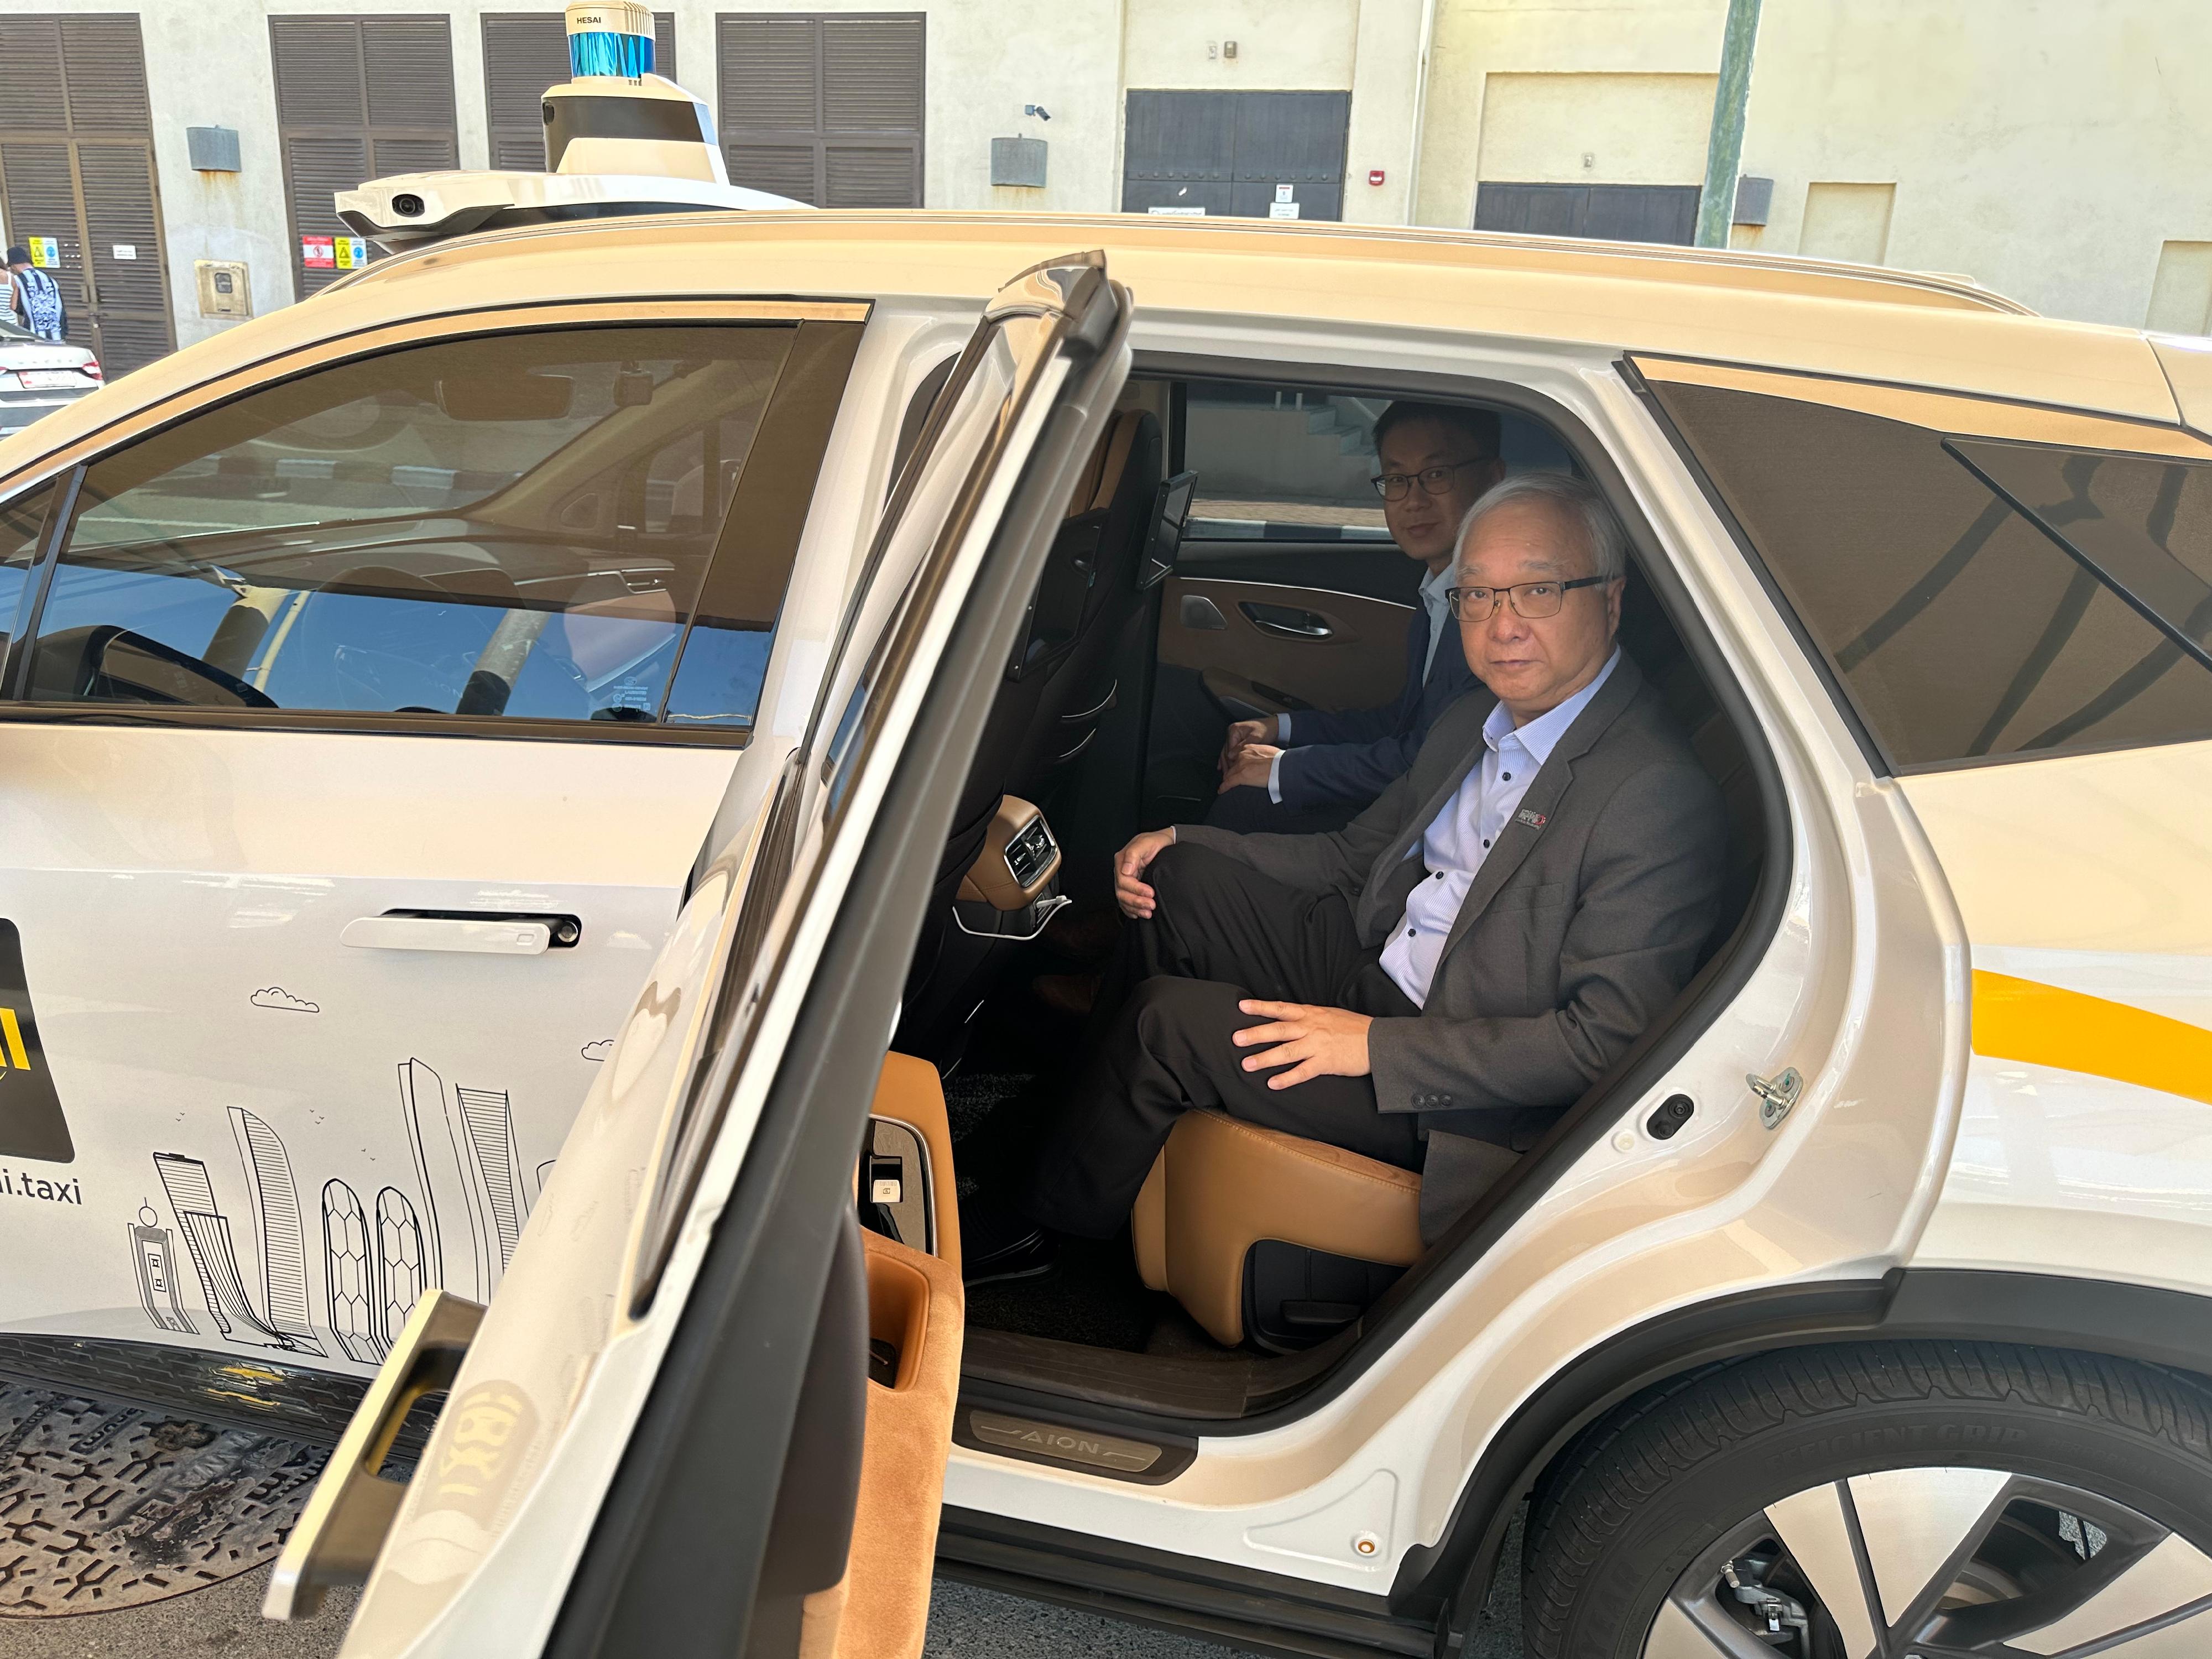 The Secretary for Environment and Ecology, Mr Tse Chin-wan, yesterday (December 4, Dubai time) visited WeRide, a technology company in Abu Dhabi, the United Arab Emirates, to learn about their autonomous driving technology. Photo shows Mr Tse on an autonomous driving taxi.